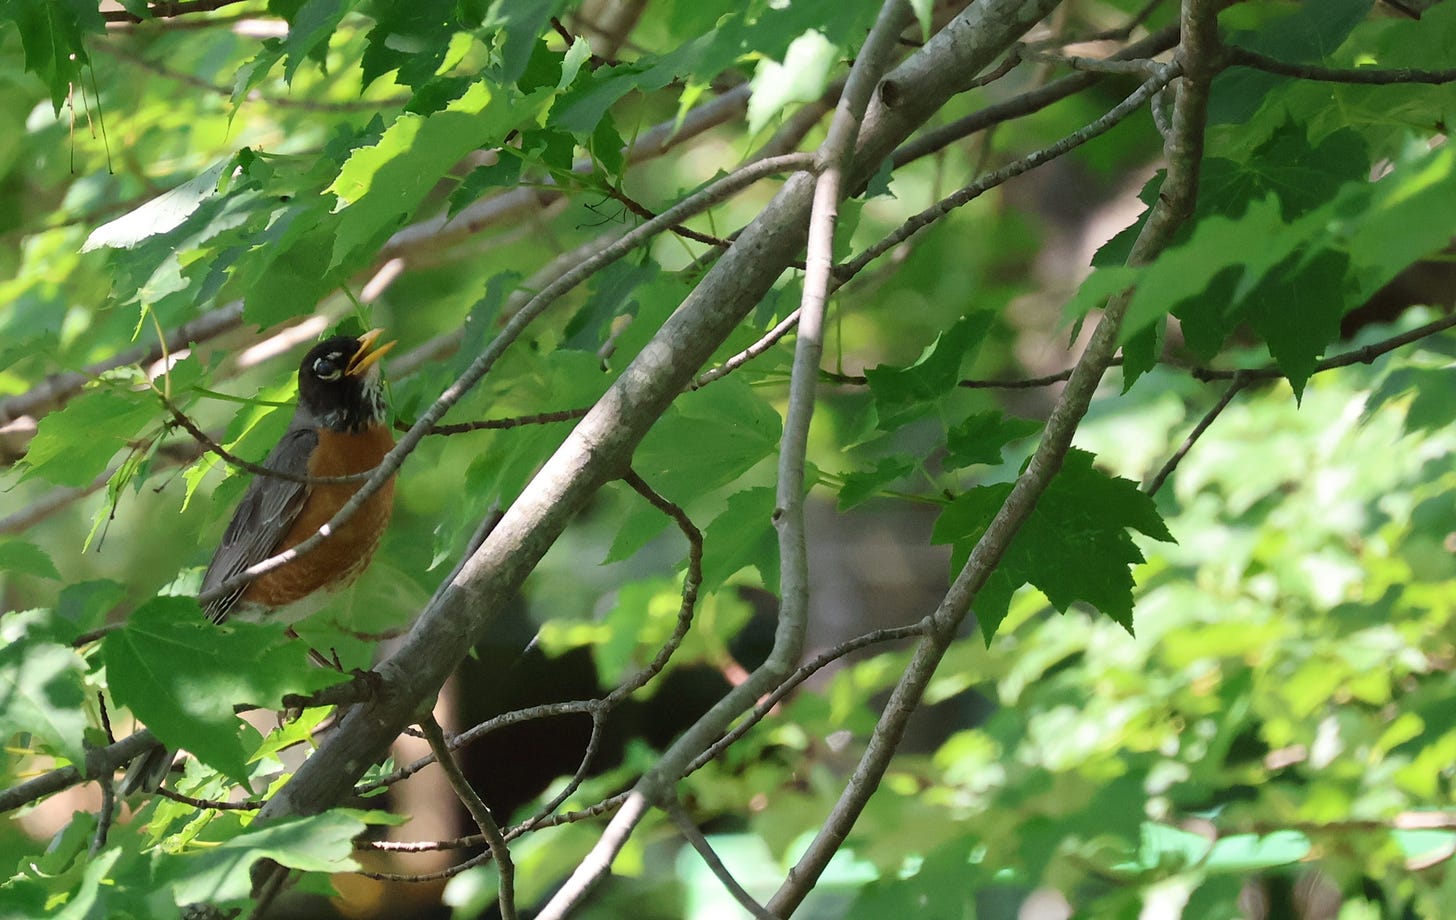 A small bird with black back feathers, a chest of orange feathers, and a yellow beak sits on a branch of a lush maple tree.